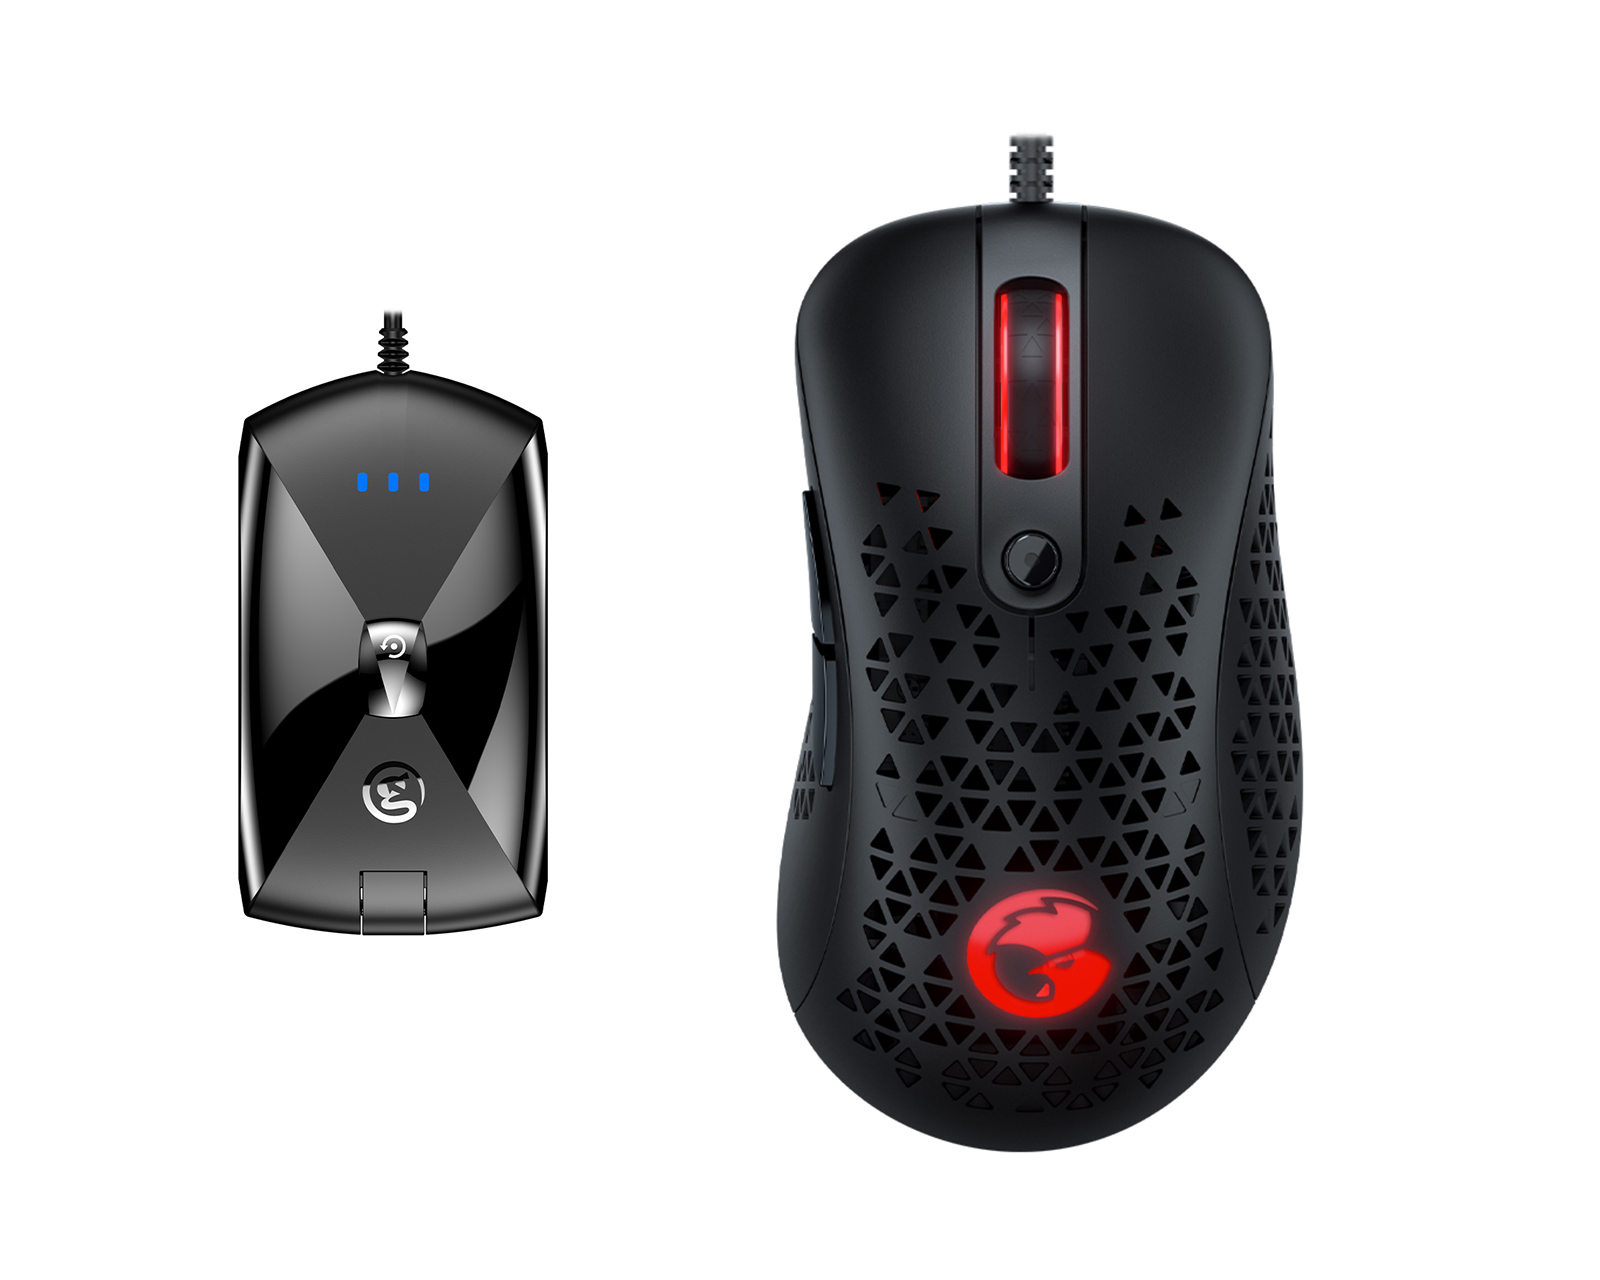 GameSir VX2 AimSwitch Combo for PC and Console